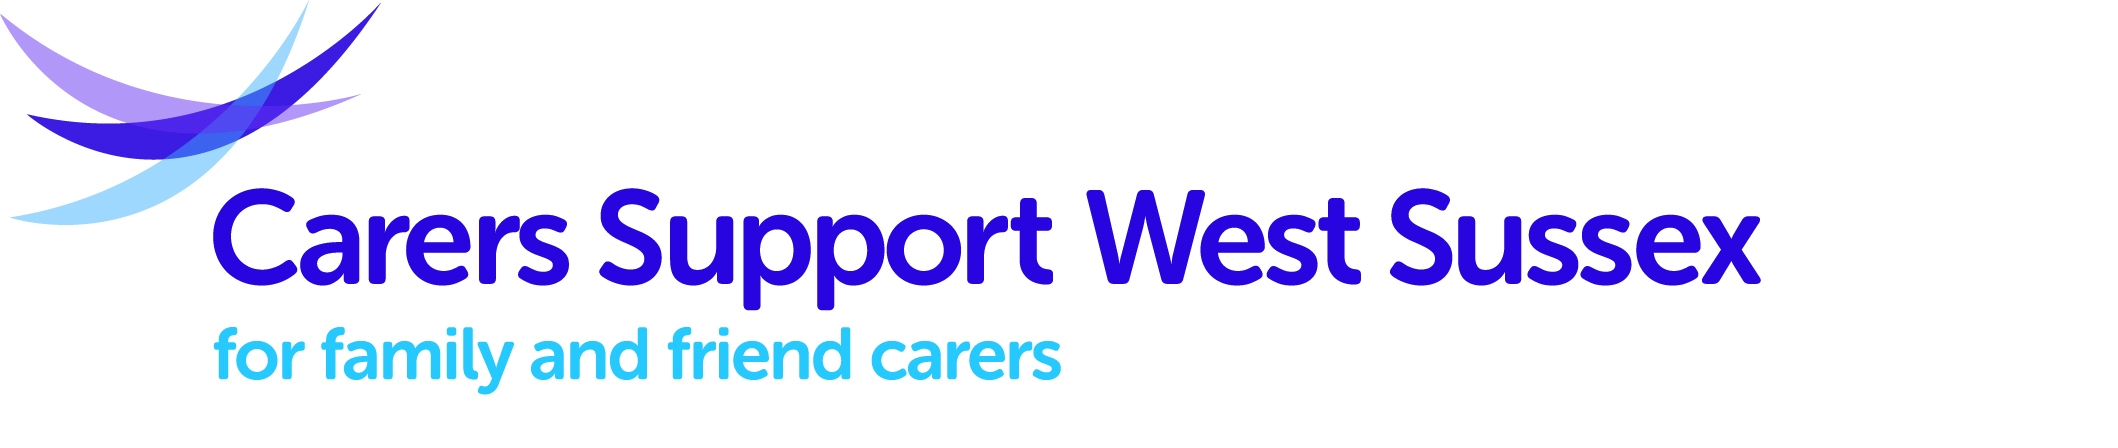 logo for Carers Support West Sussex